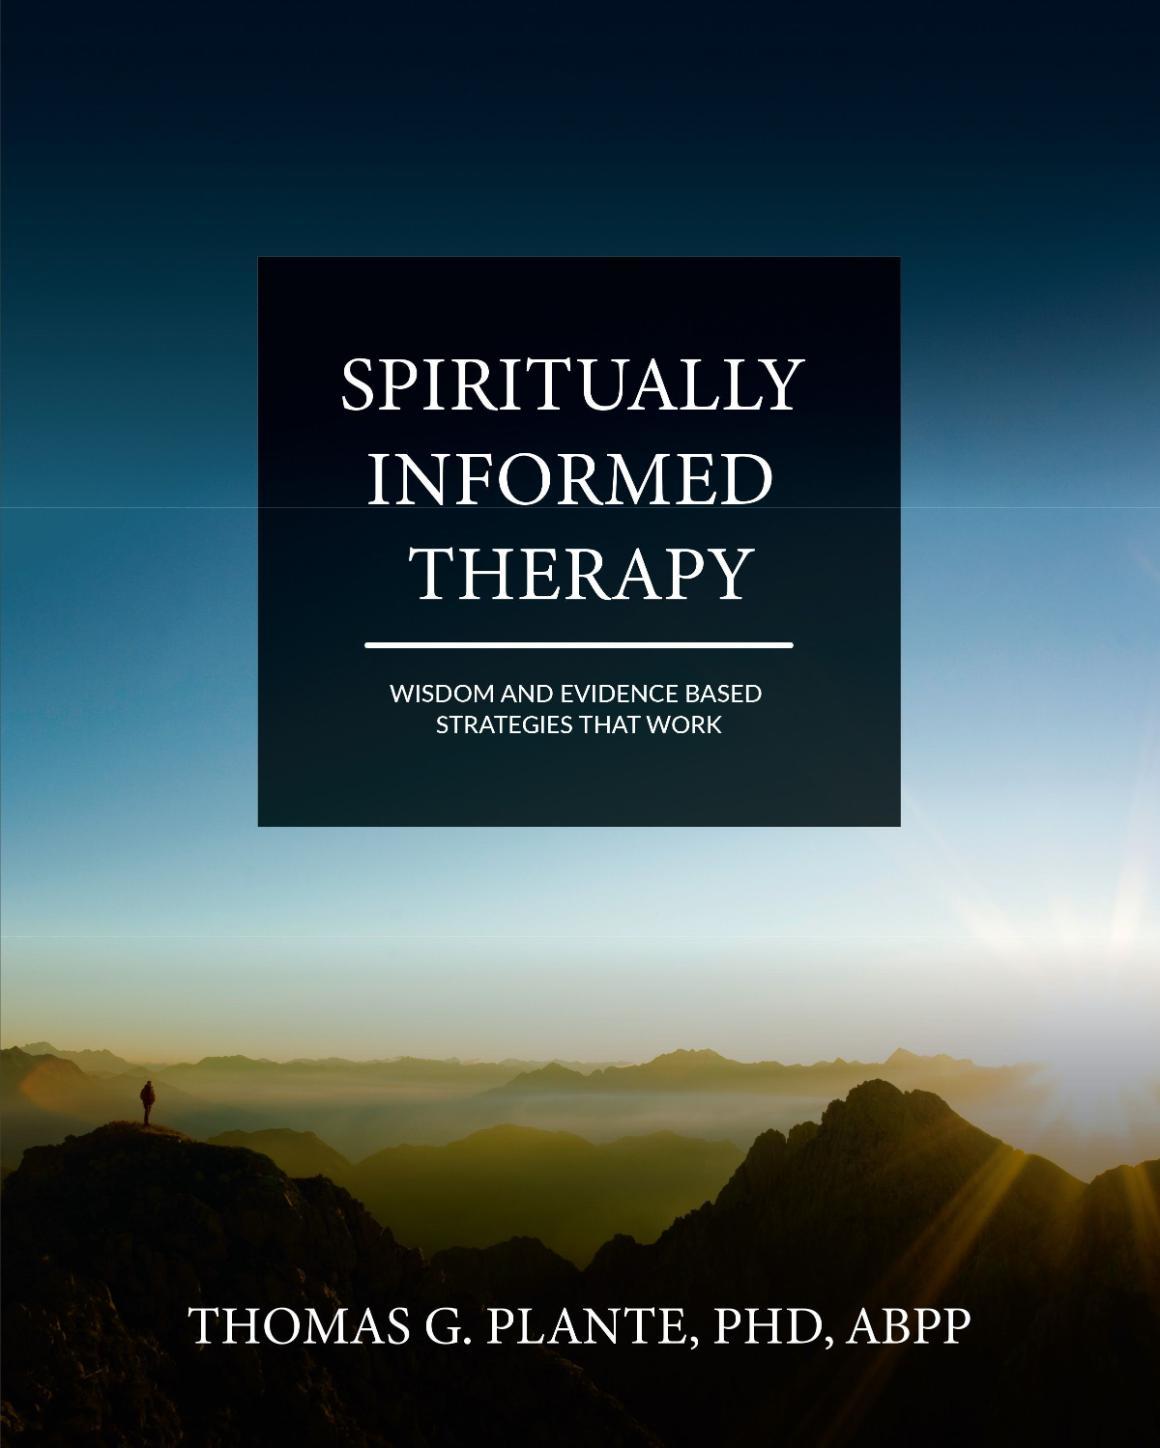 Spiritually Informed Therapy book cover